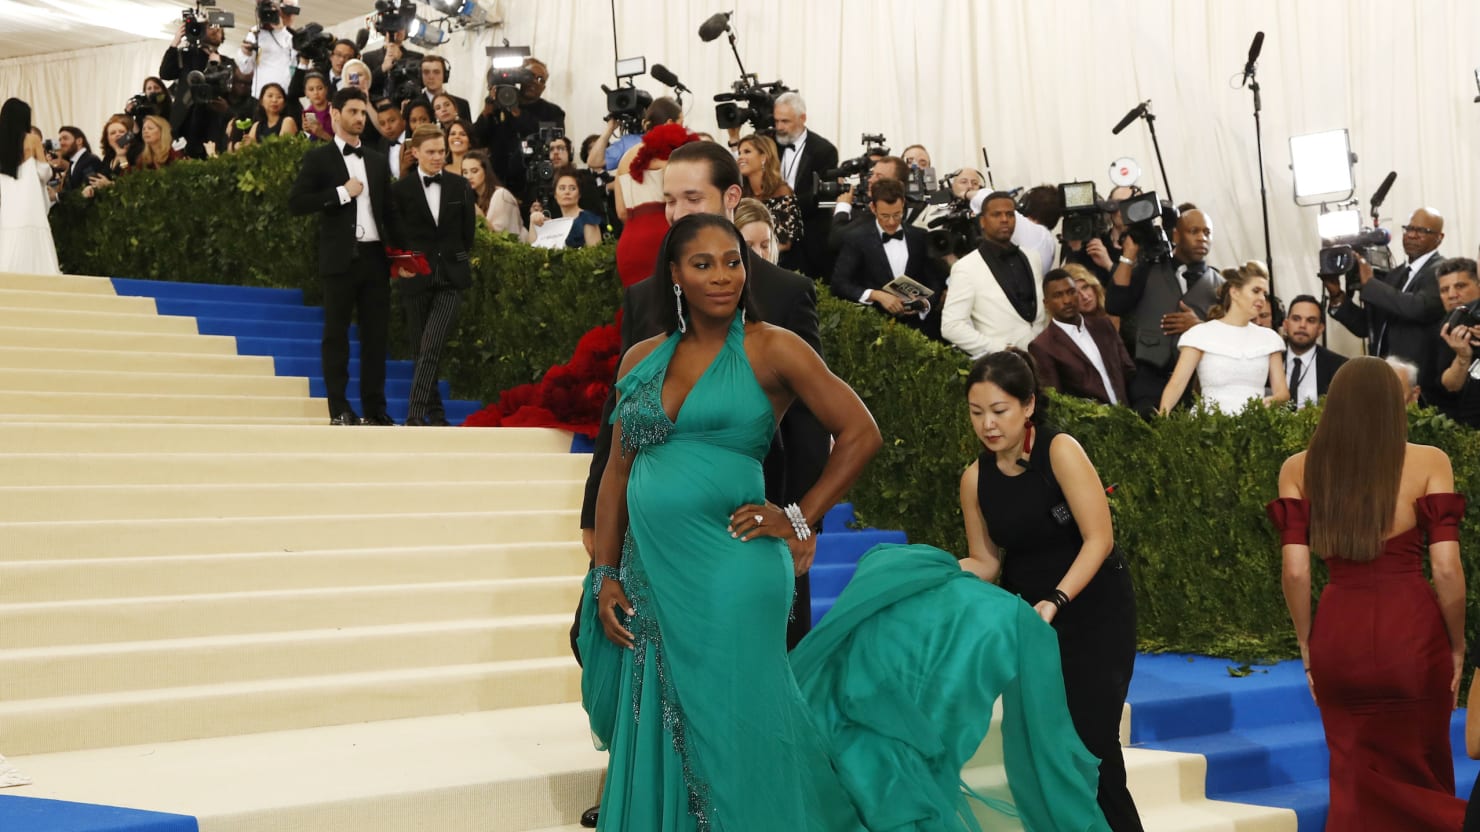 Report: Serena Williams Gives Birth To Baby Girl - The Daily Beast